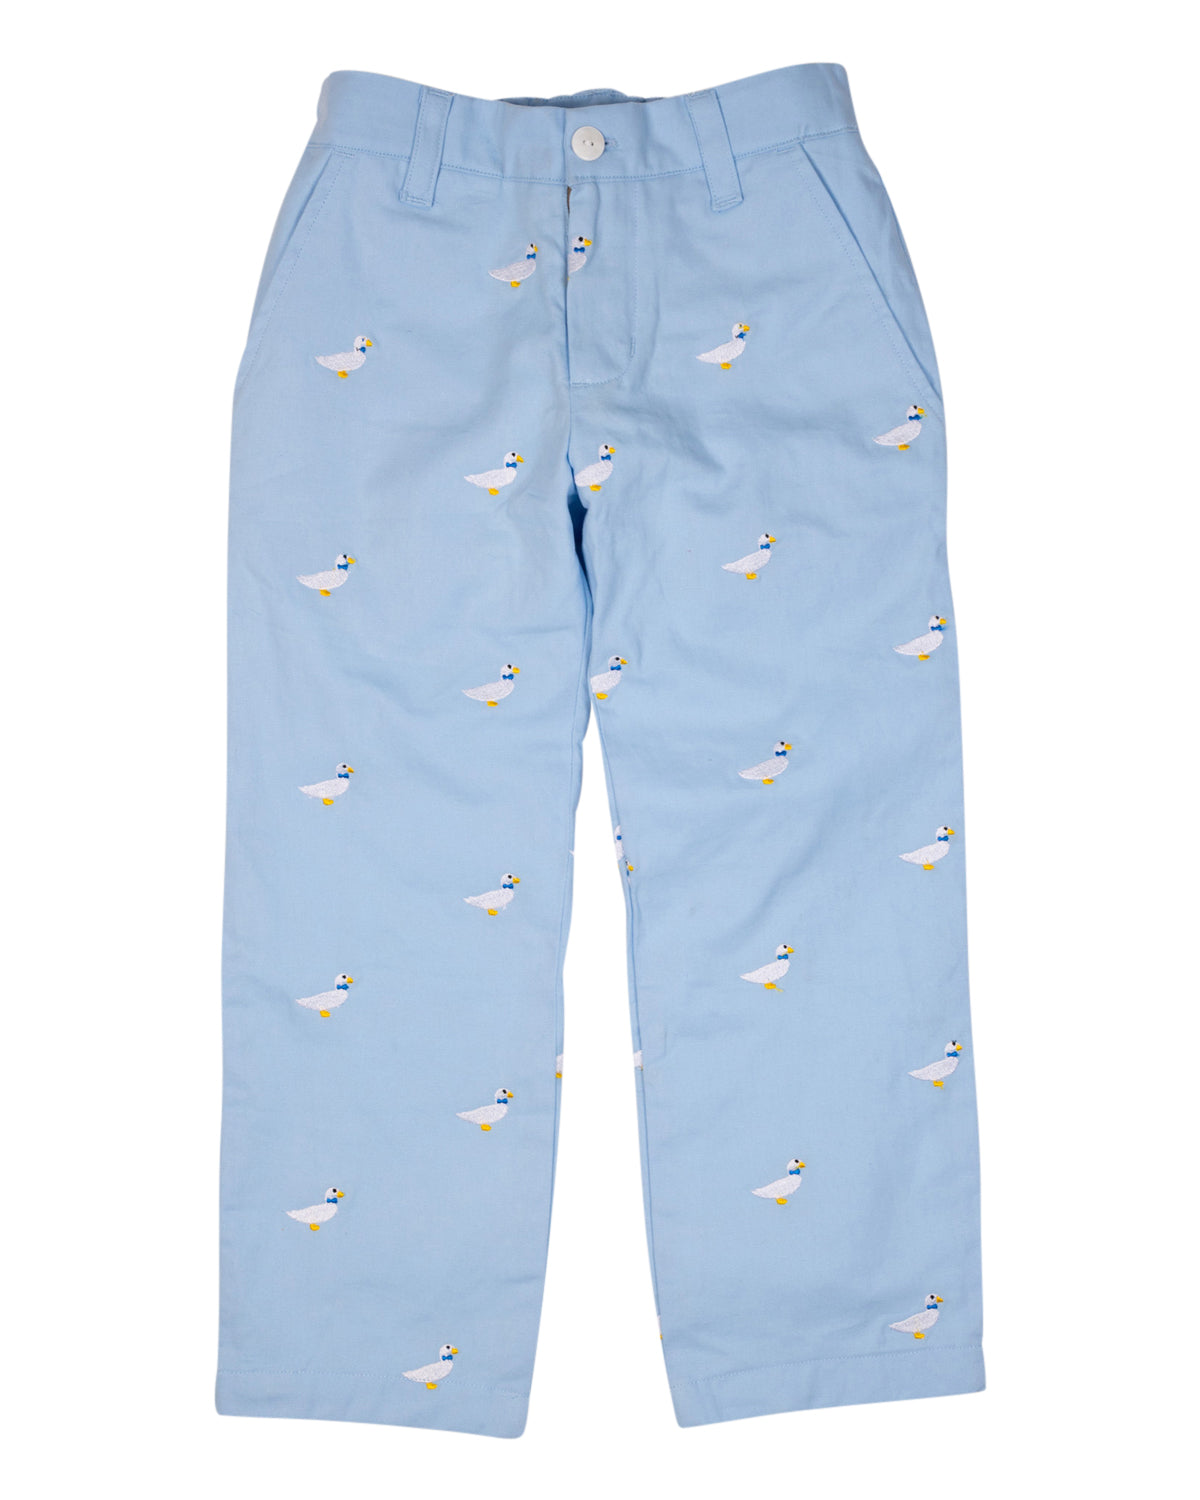 Duck Crossing Embroidered Pants-FINAL SALE